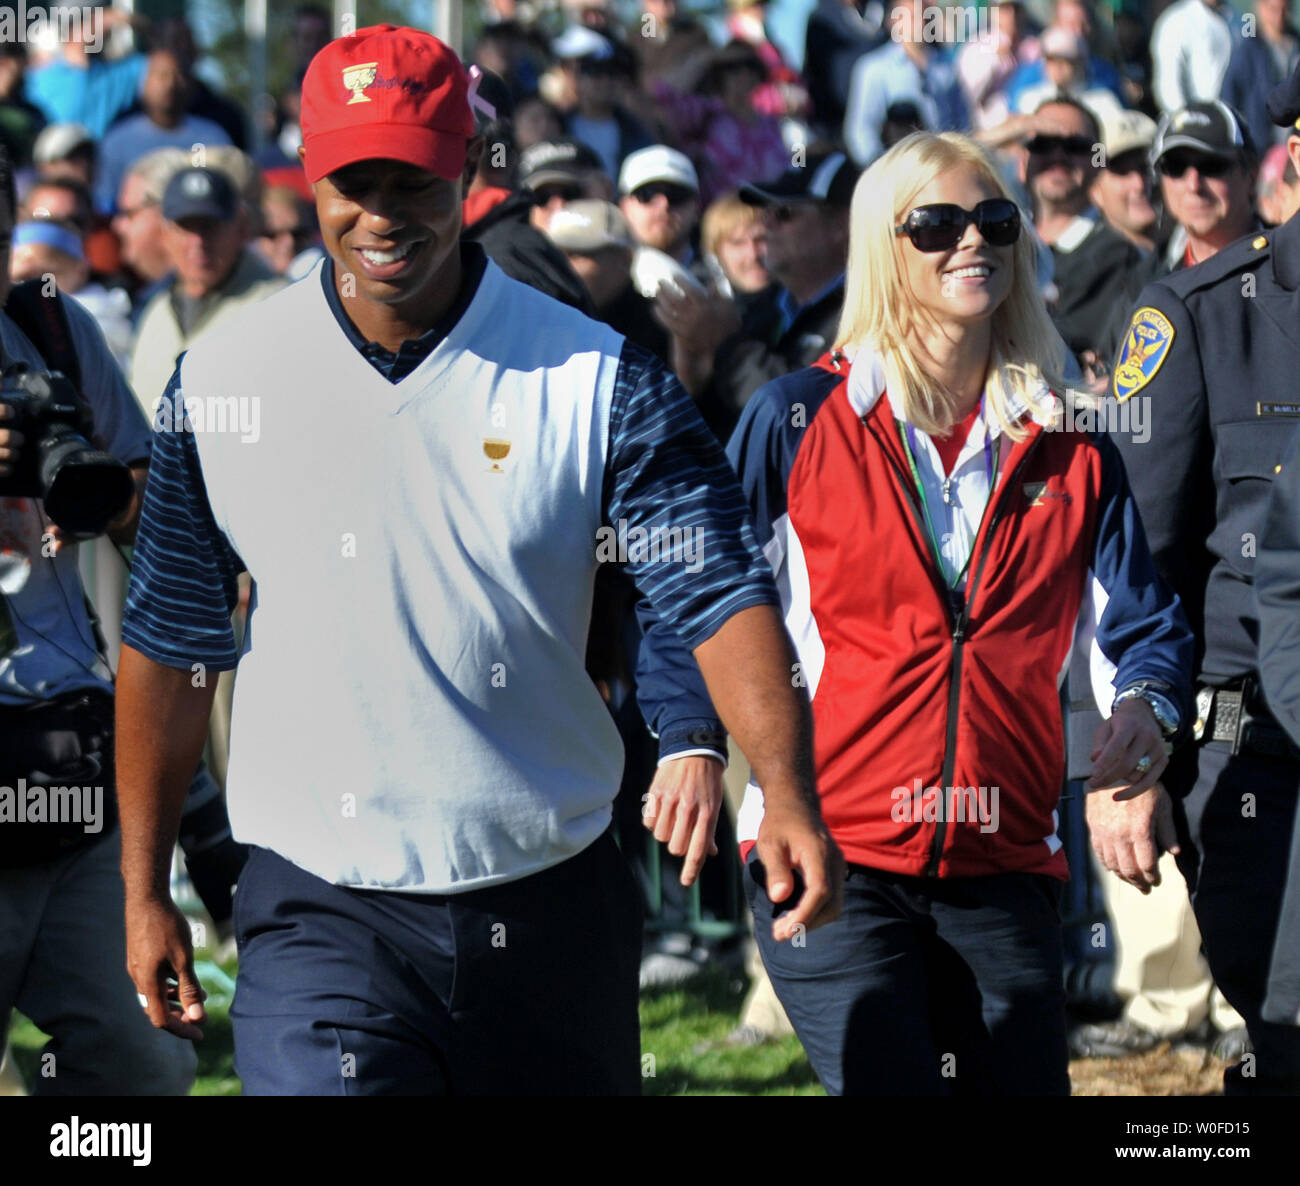 Tiger Woods walks with his wife Elin Nordegren during the President Cup in San Francisco on October 9, 2009.  Woods announced on December 11, 2009 that he will take an indefinite break from professional golf after rumors of alleged affairs with several women have surfaced. UPI/Kevin Dietsch/Files Stock Photo